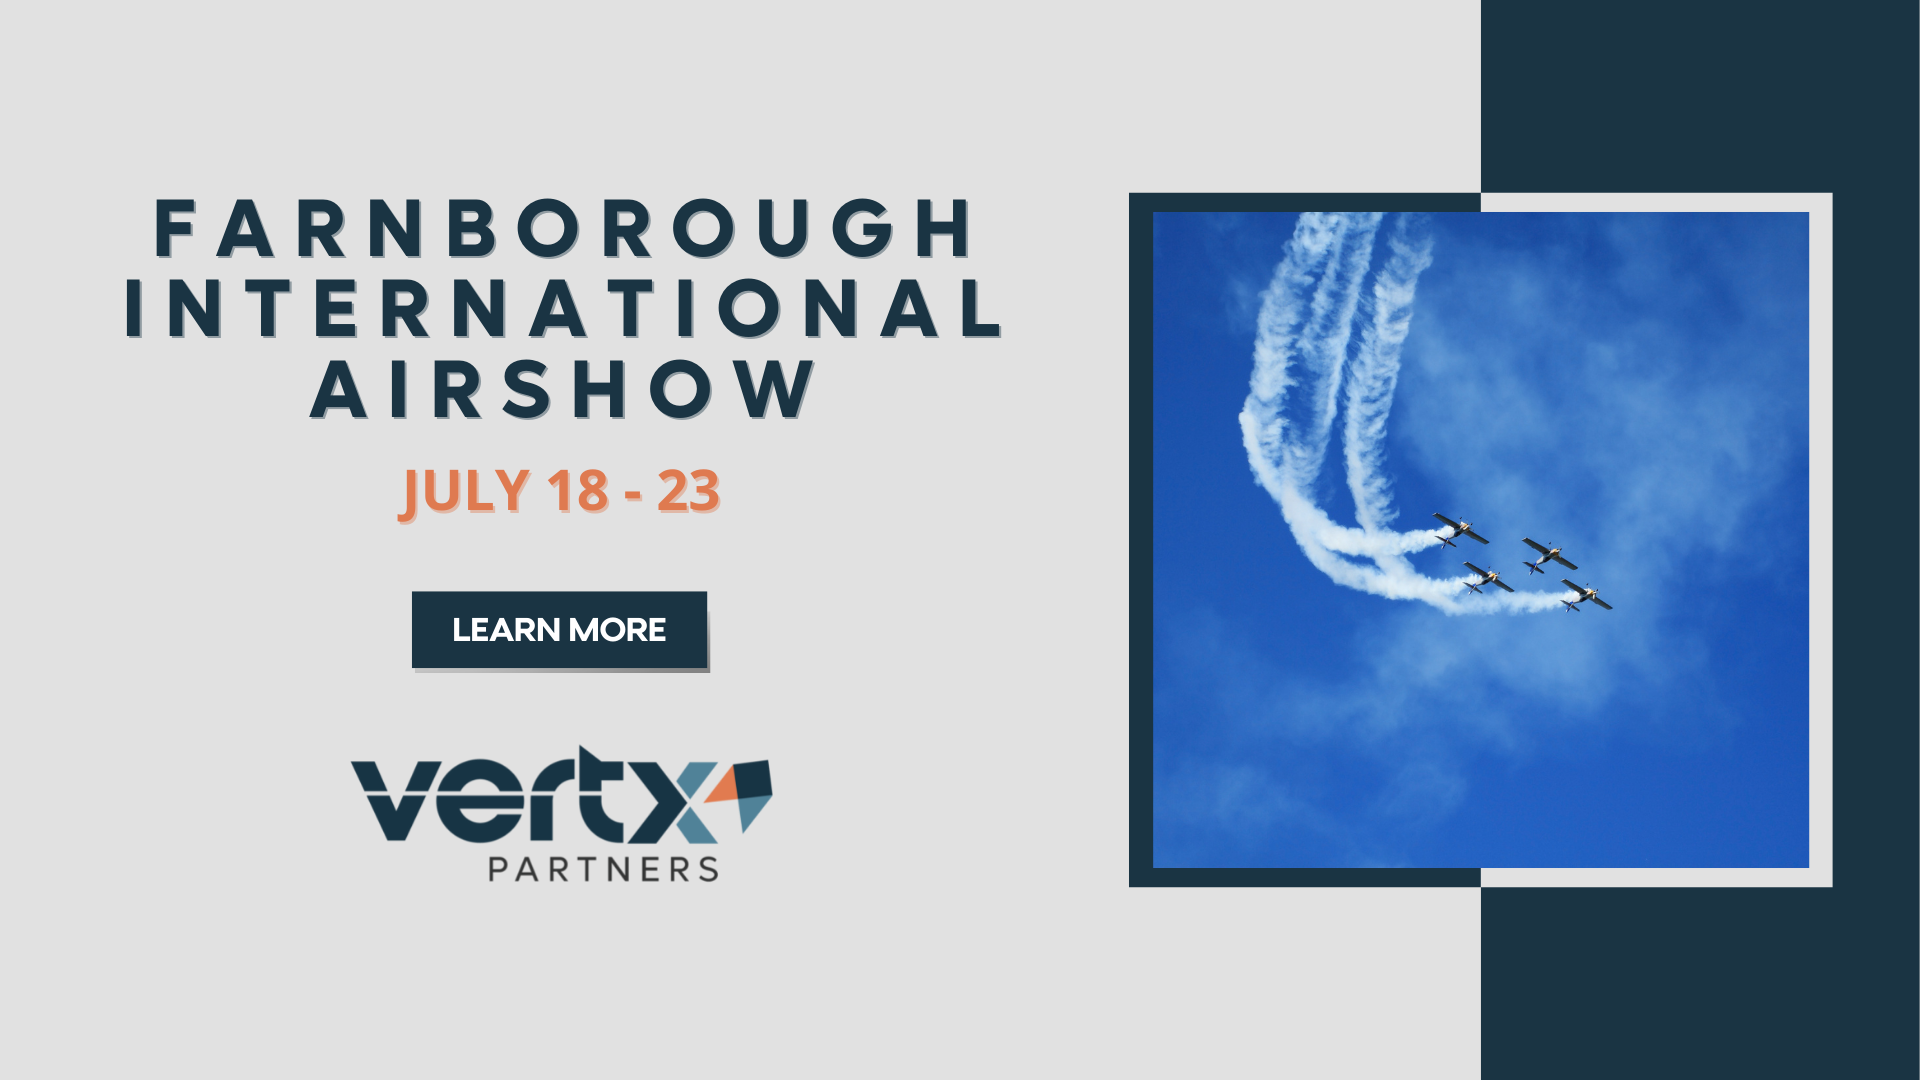 A graphic that says "Farnborough International Airshow" that is occurring July 18th through the 23rd. There is also an image containing 4 fighter jets flying with a blue sky in the background